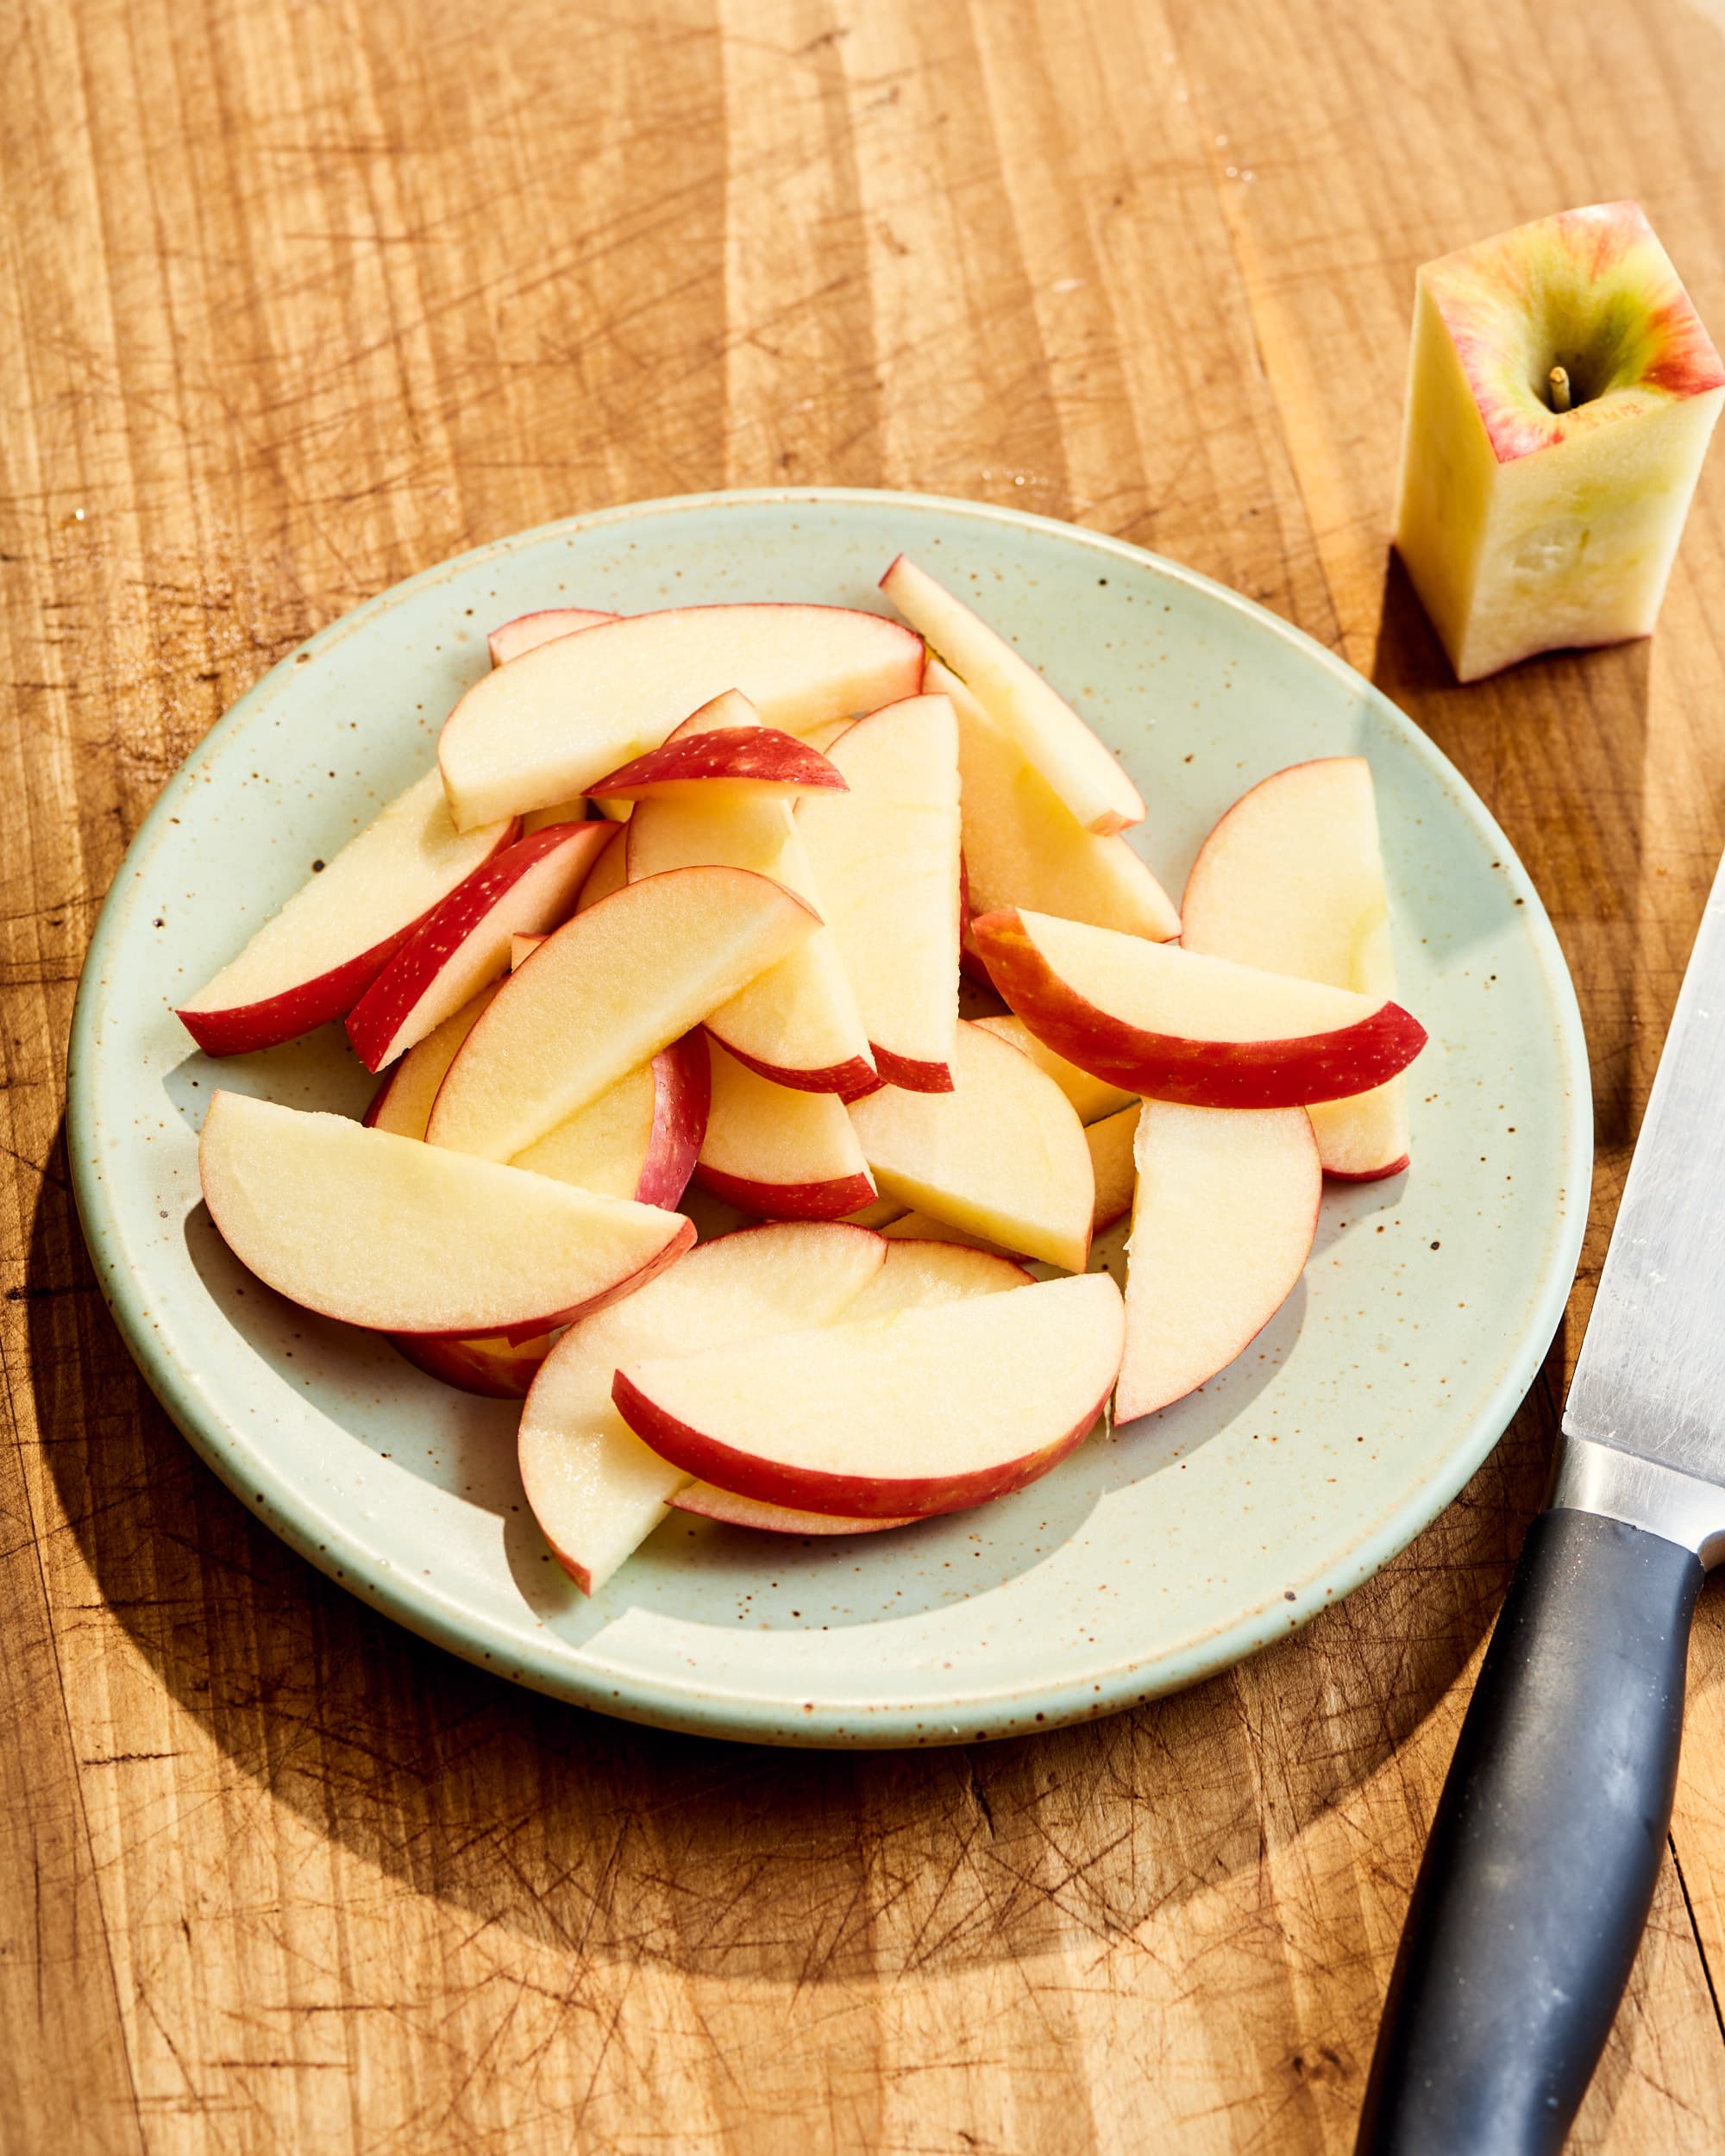 How To Cut Apples Into Slices 